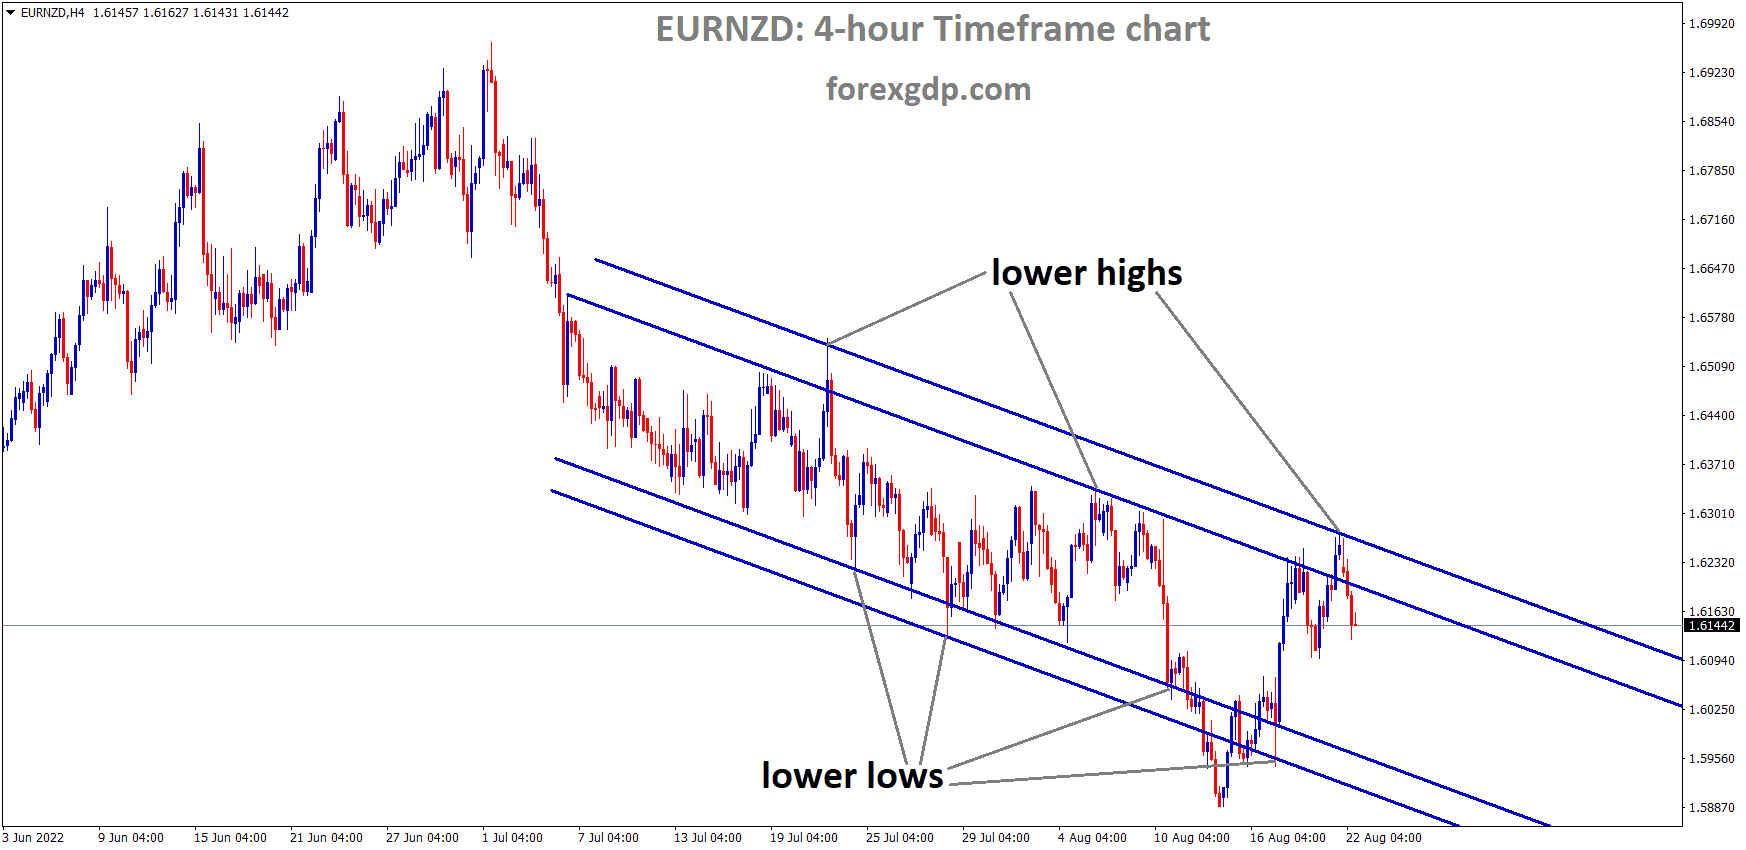 EURNZD is moving in the Descending channel and the Market has fallen from the Lower high area of the channel